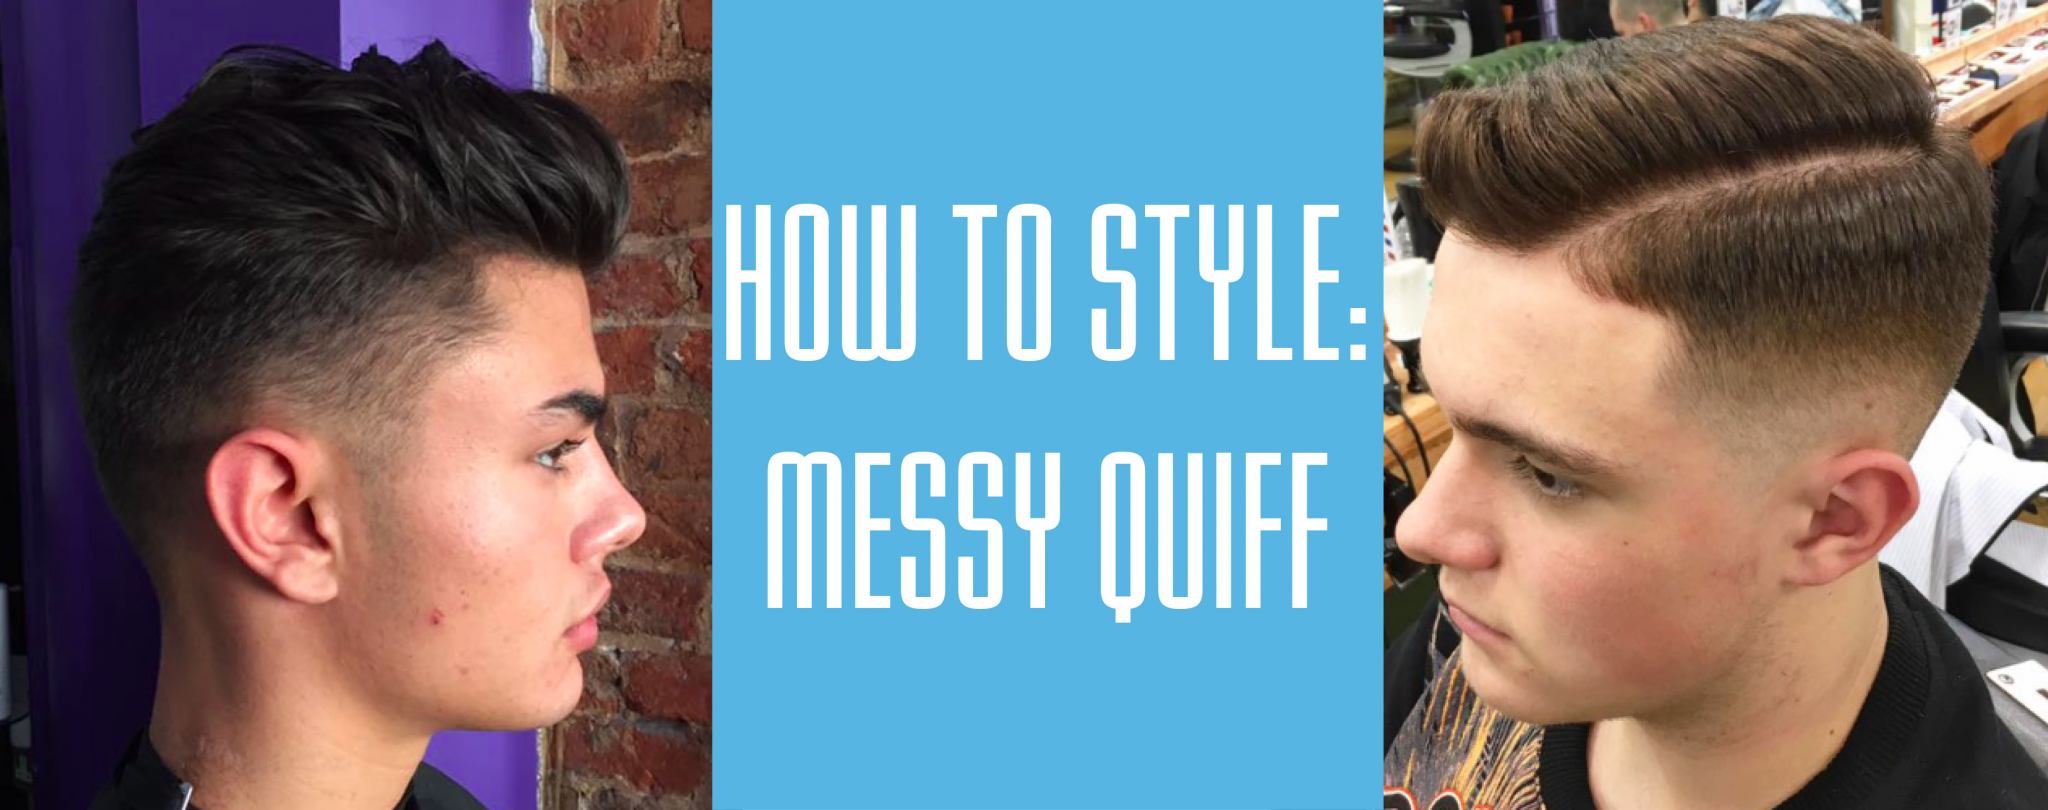 How to Style Men's Short Hair: Messy Quiff Hair Tutorial